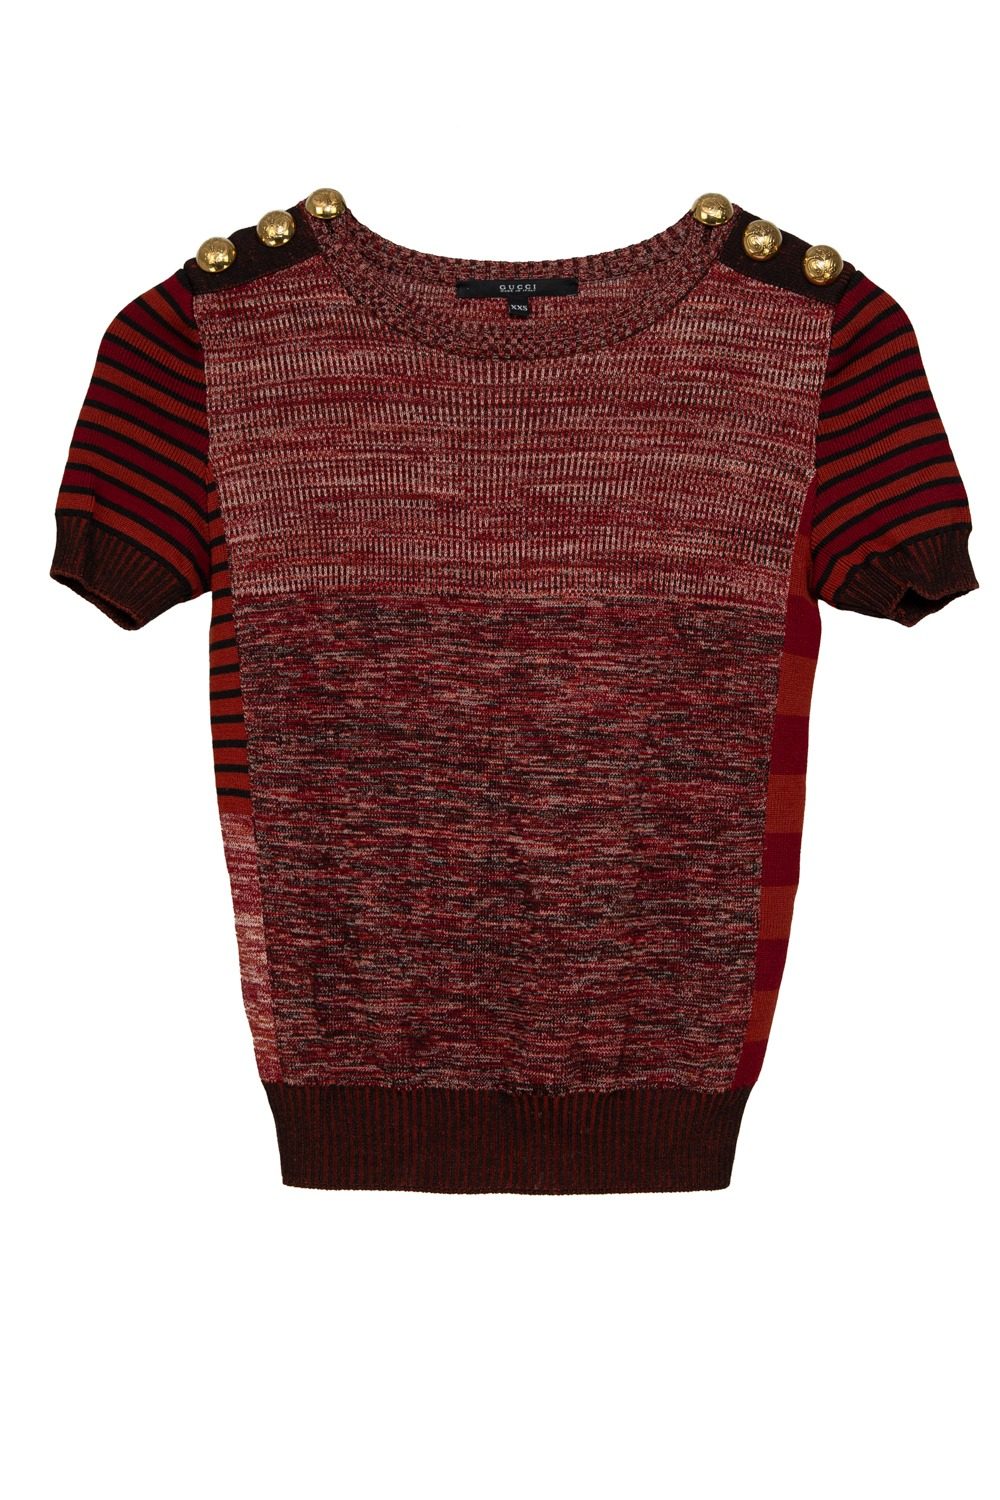 Thumbnail of http://Gucci%20Vintage%20Top%20in%20Bordeaux